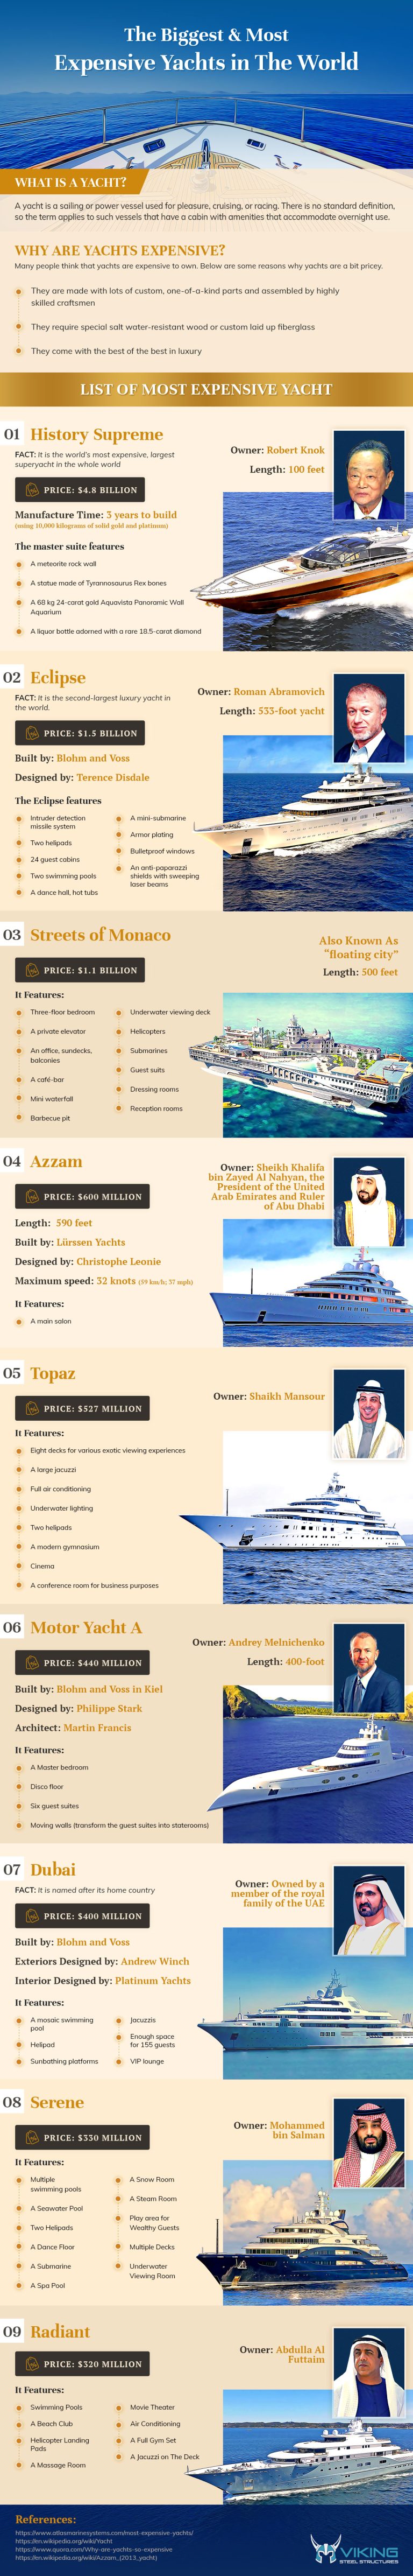 The Biggest & Most Expensive Yachts in the World